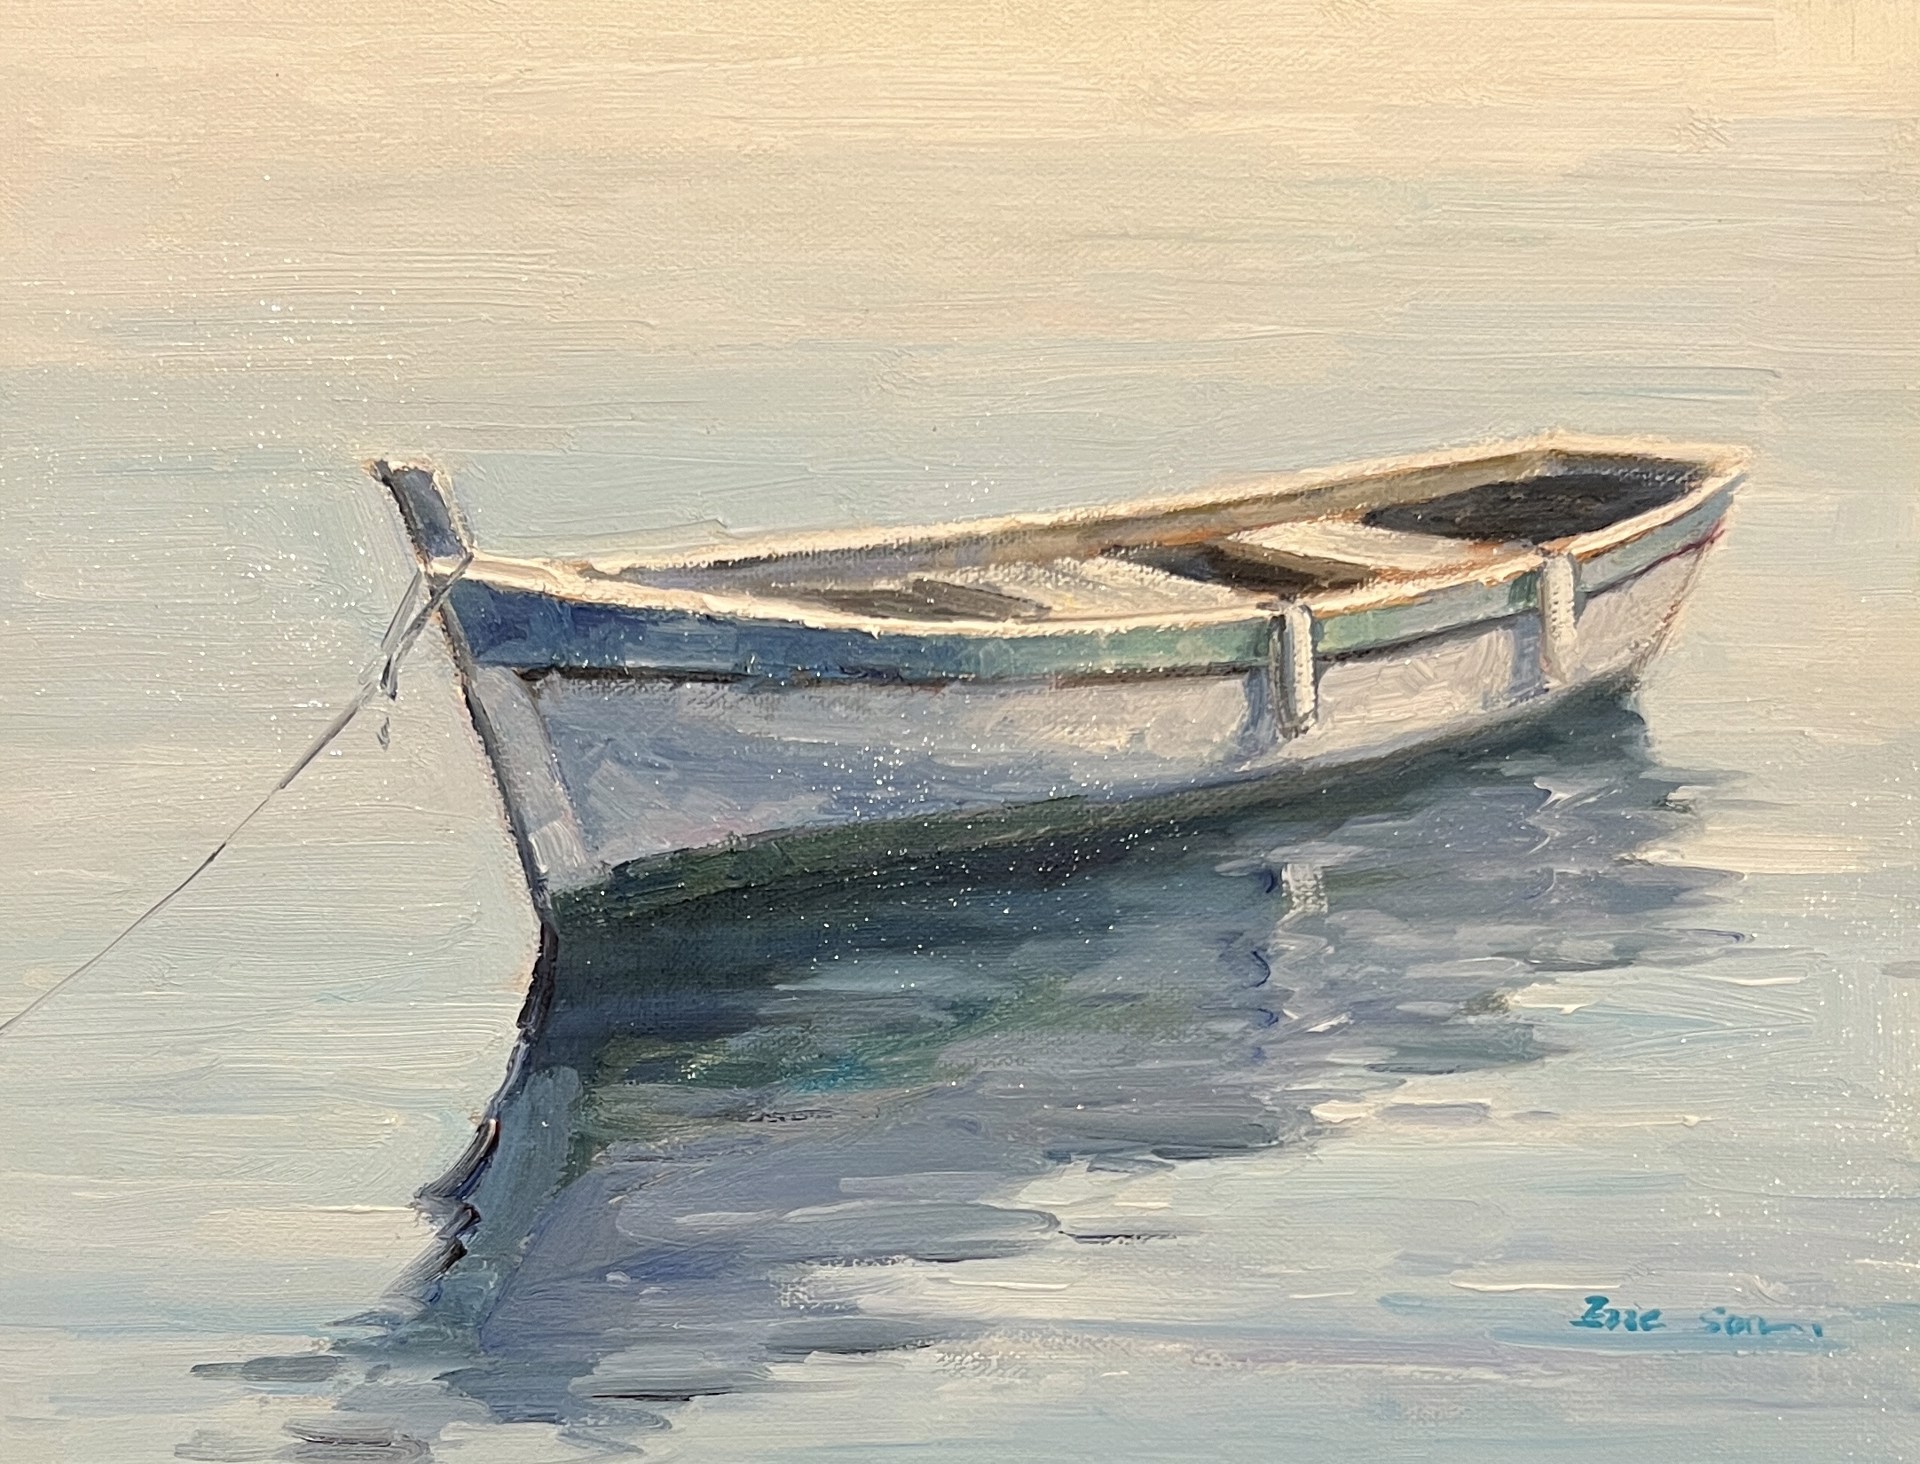 WHITE BOAT WITH DOCK BUMPERS by ERIC SUN